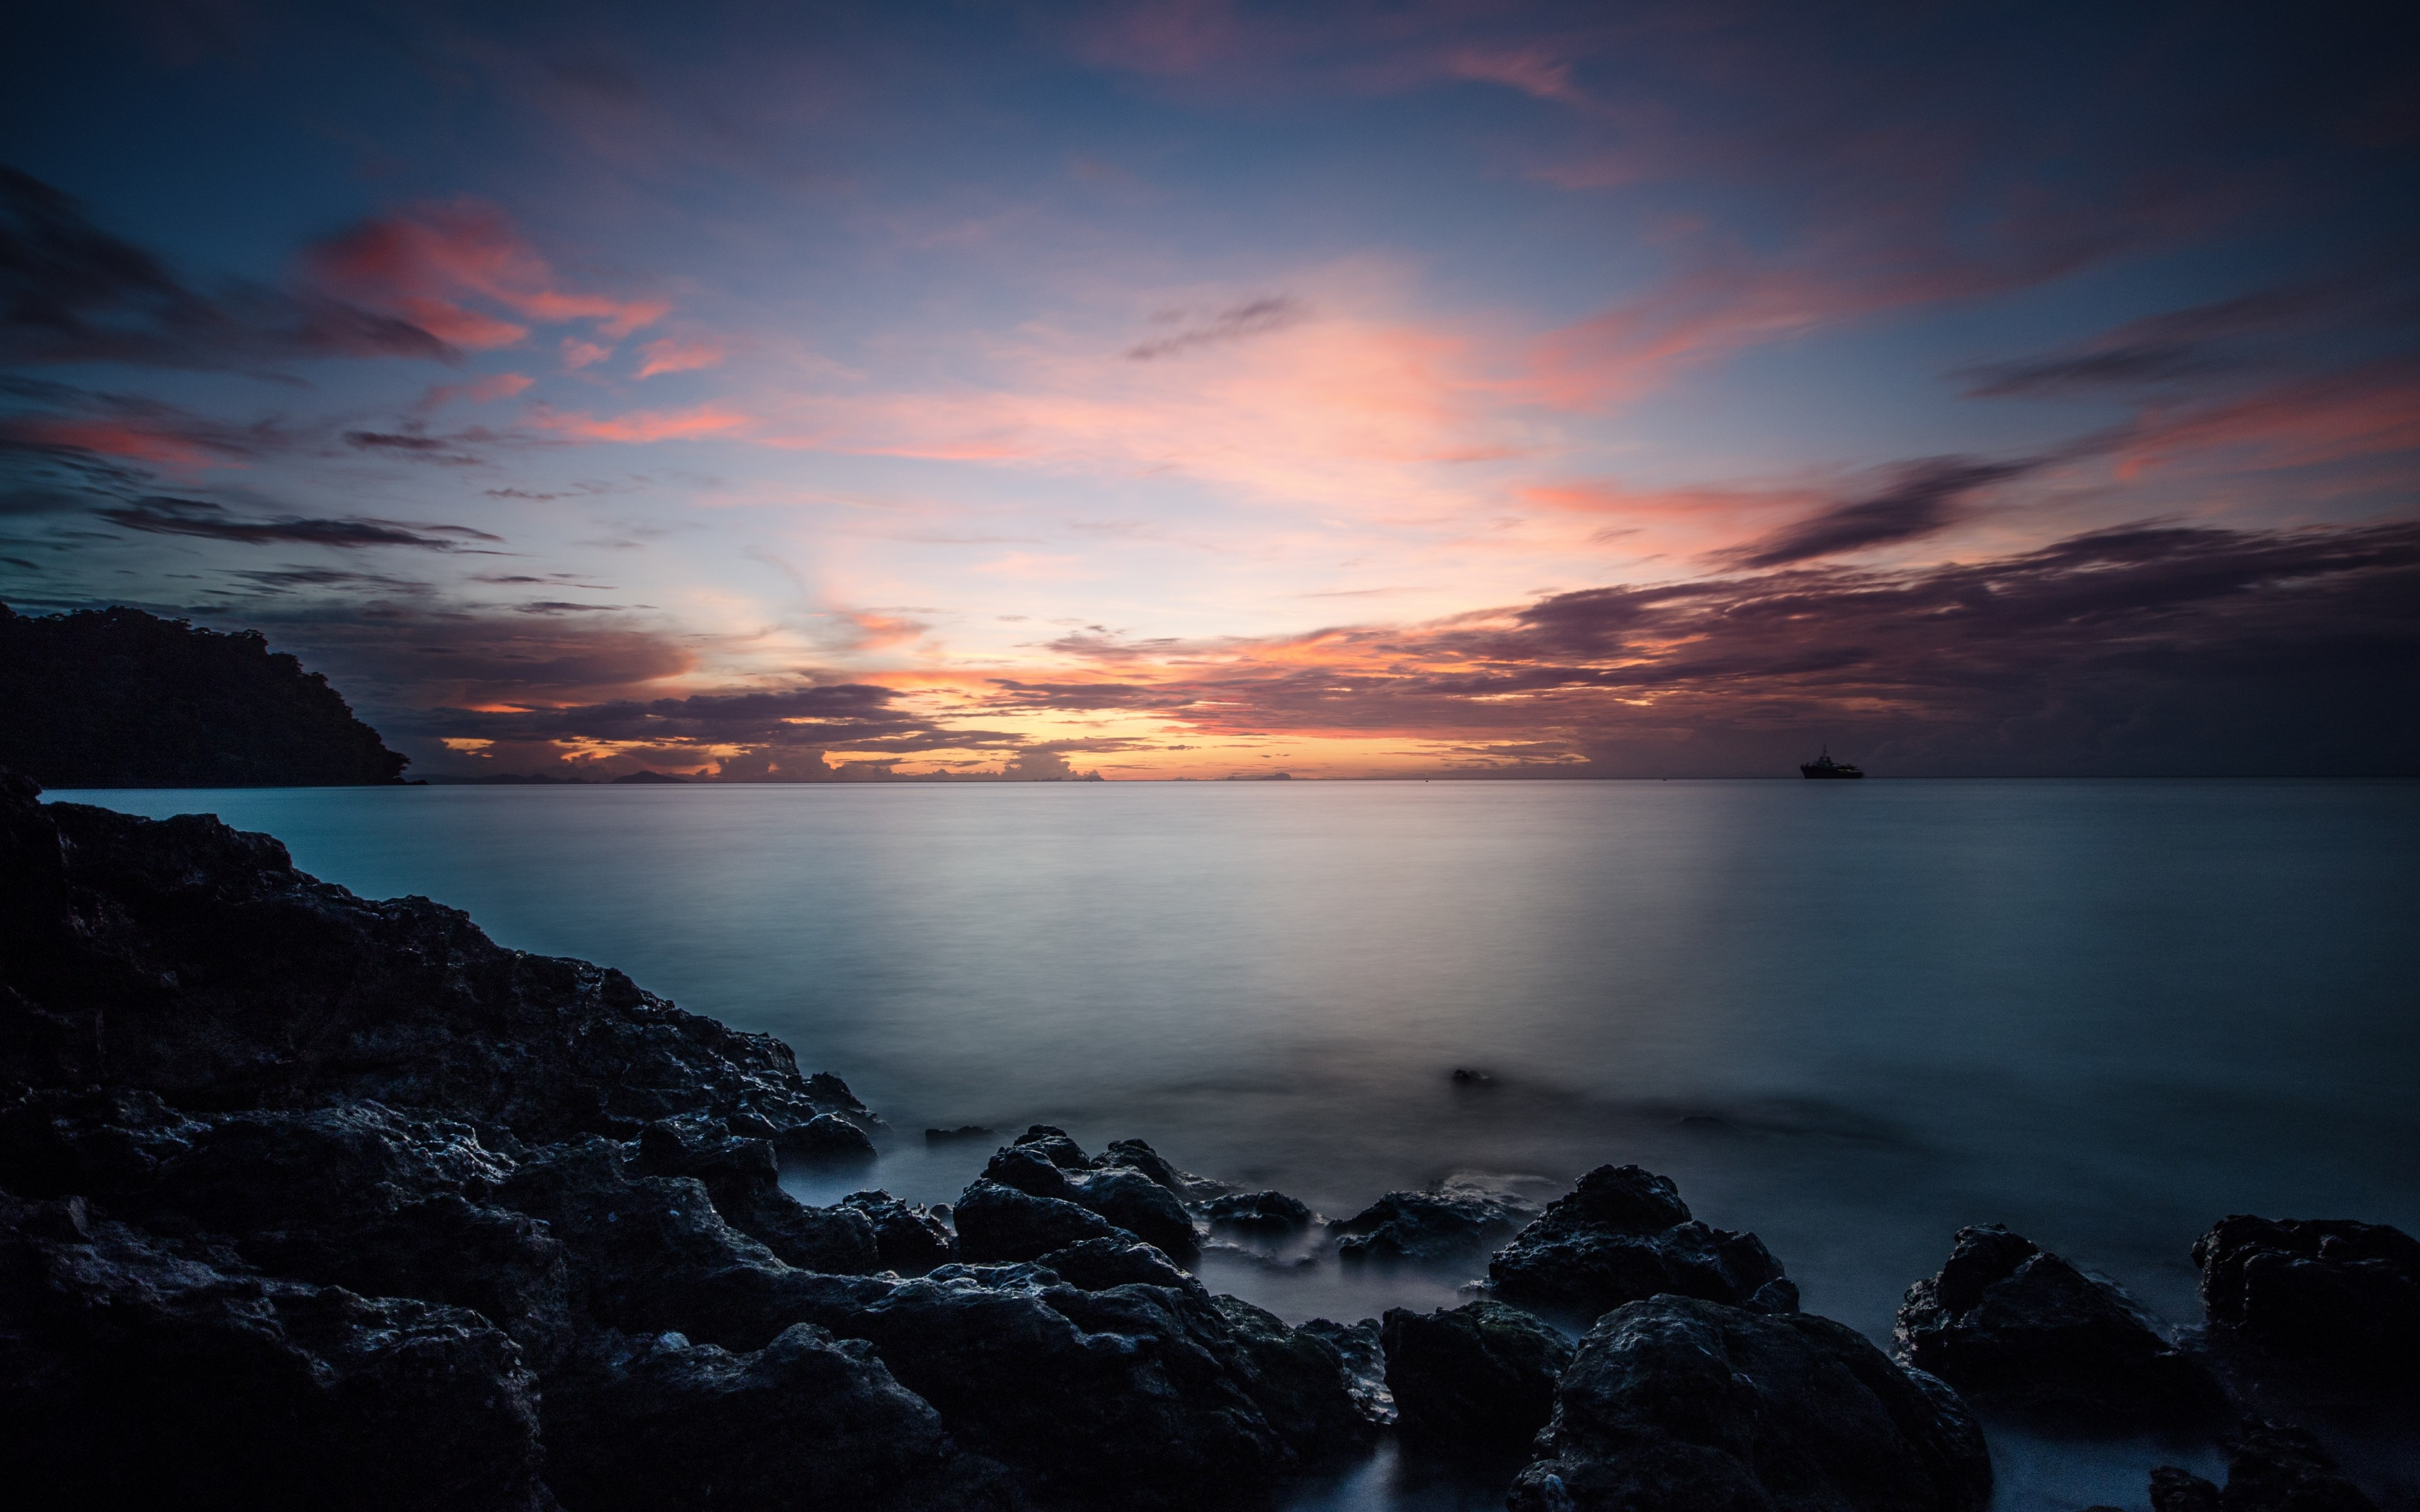 Sunset, rocks, clouds, view from Thailand wallpaper 3840x2400